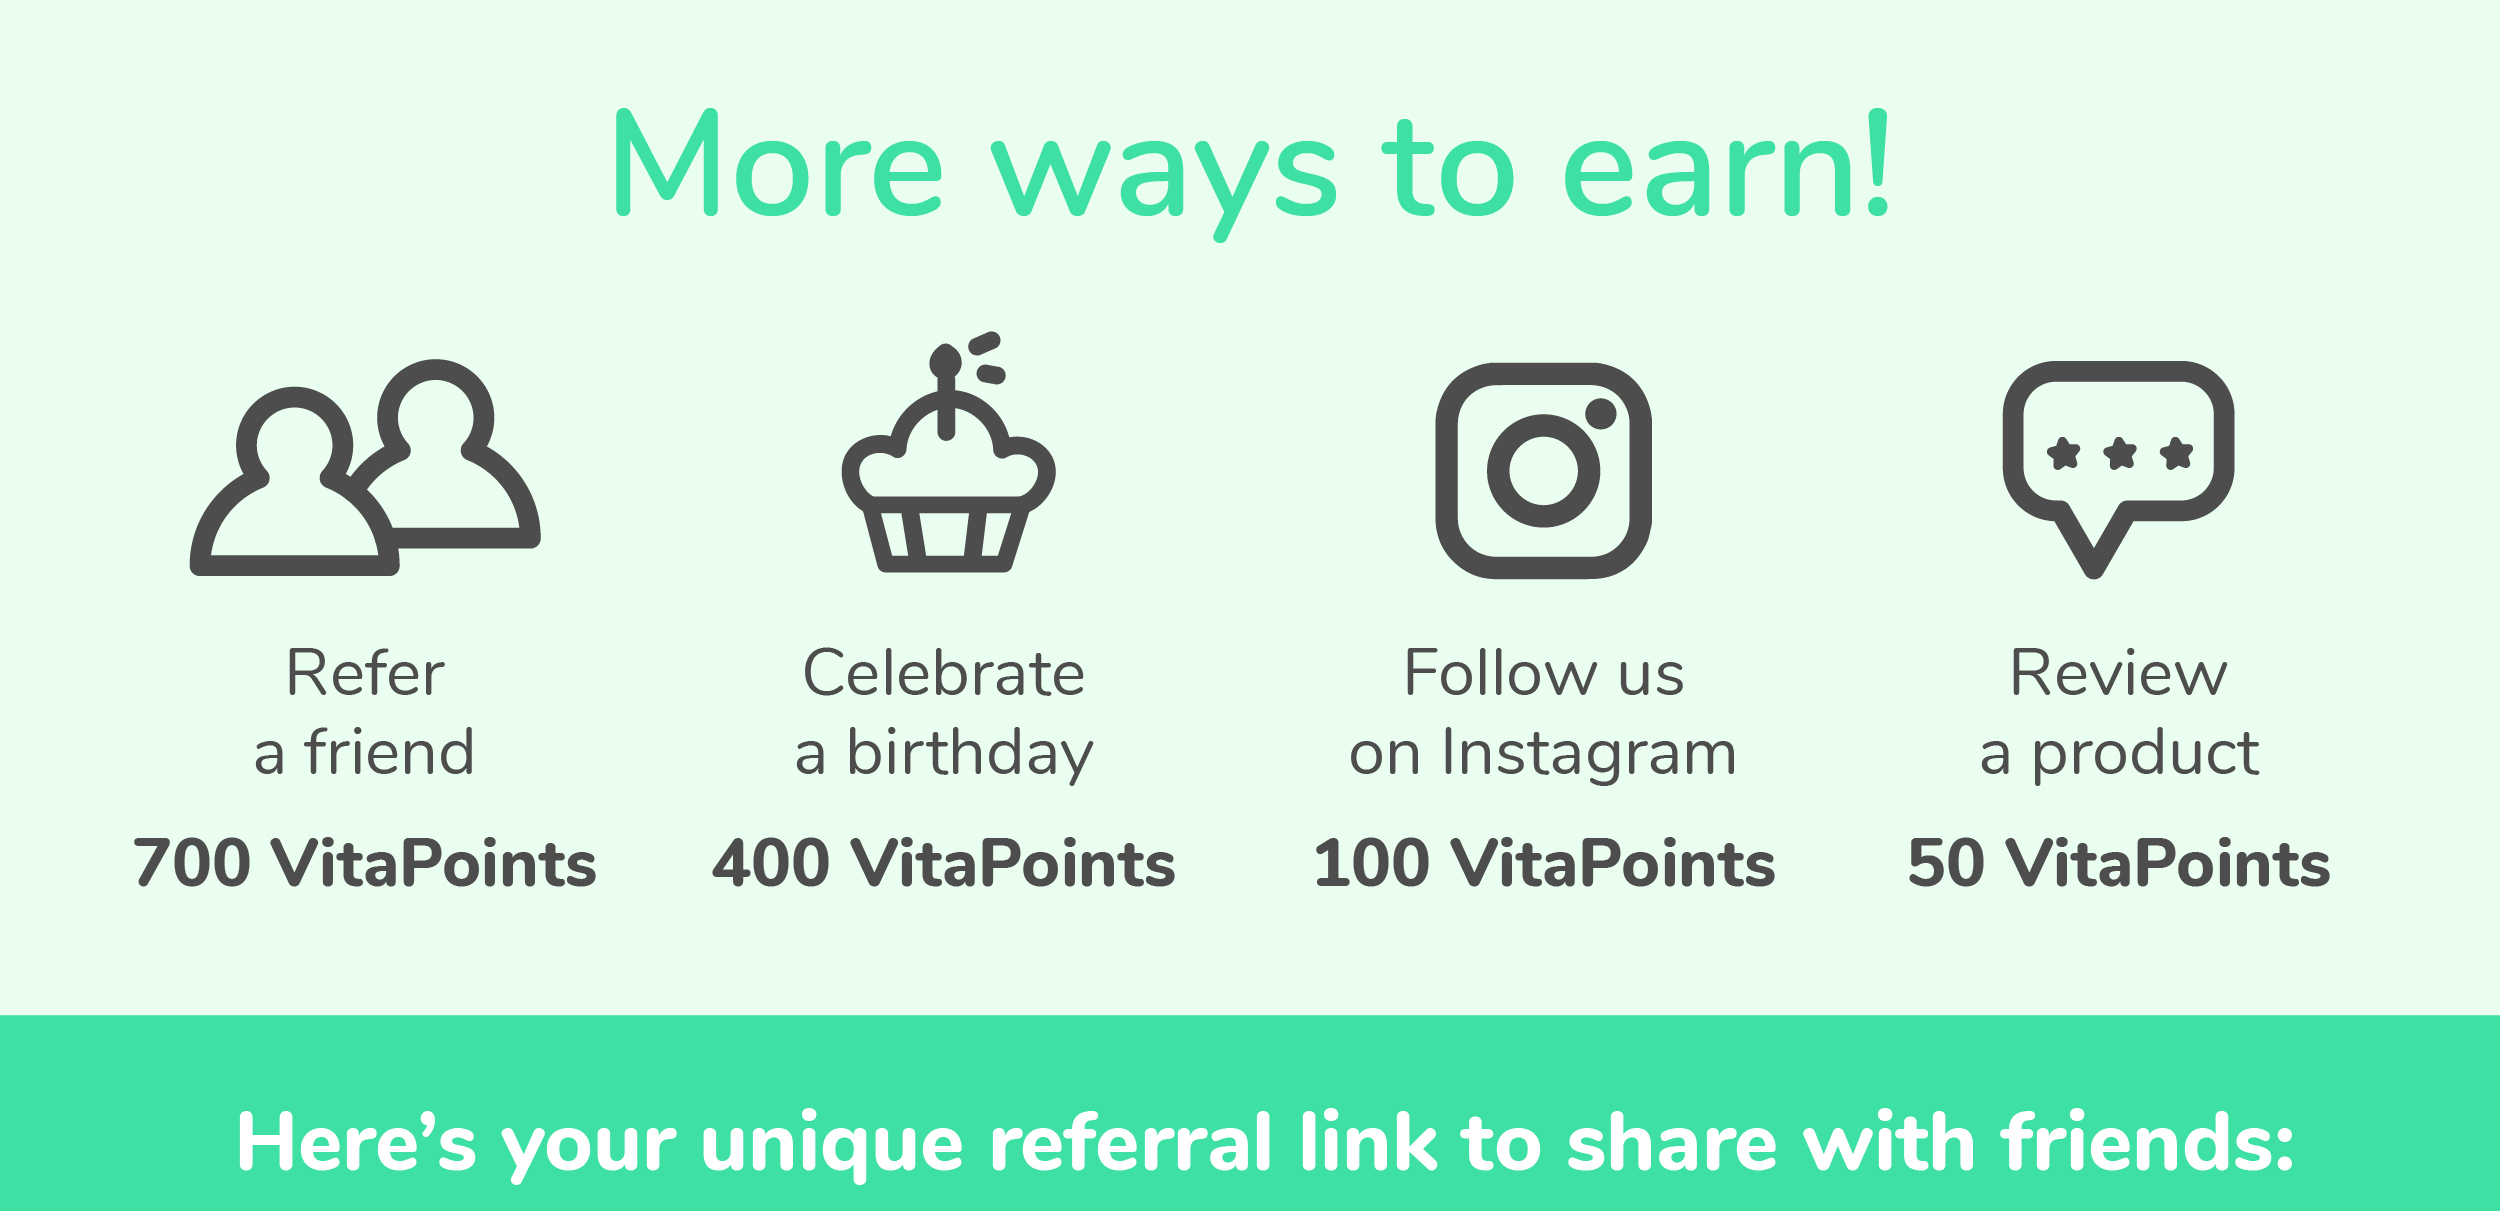 More ways to earn! Refer a friend for 700 VitaPoints, Celebrate a birthday for 400 VitaPoints, Follow us on Instagram for 100 VitaPoints, and Review a product for 50 VitaPoints. | Here's your unique referral link to share with friends: